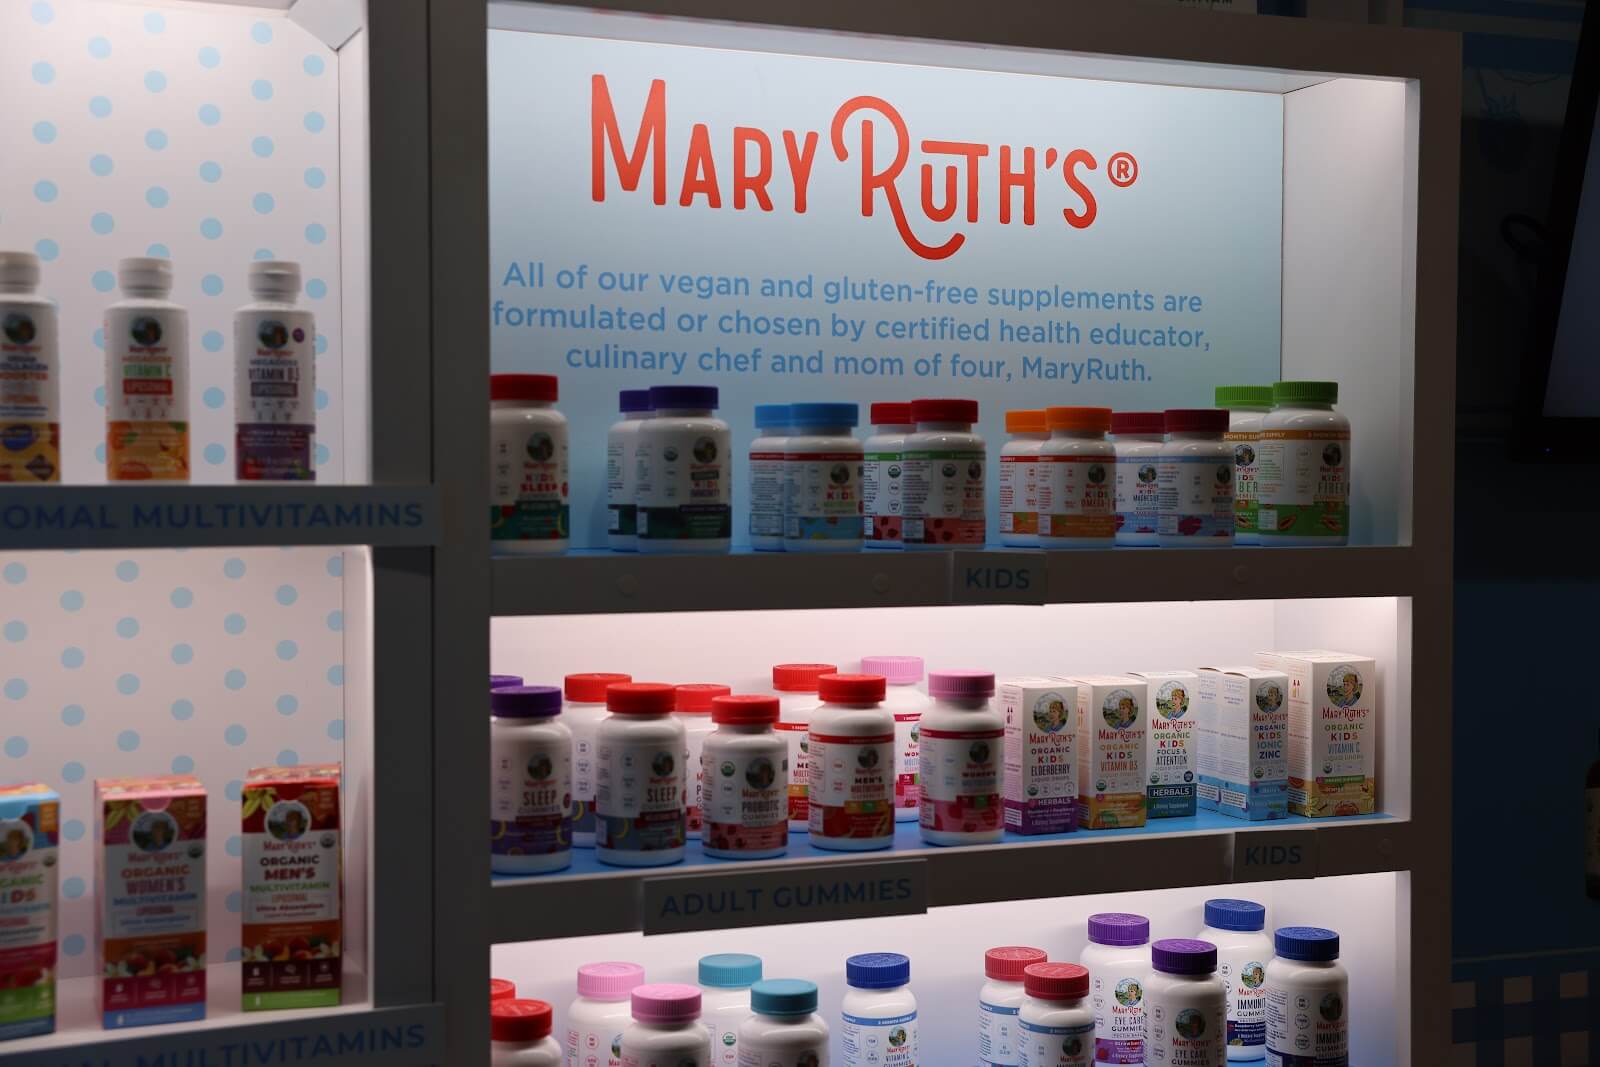 mary ruth's at expo east 2022